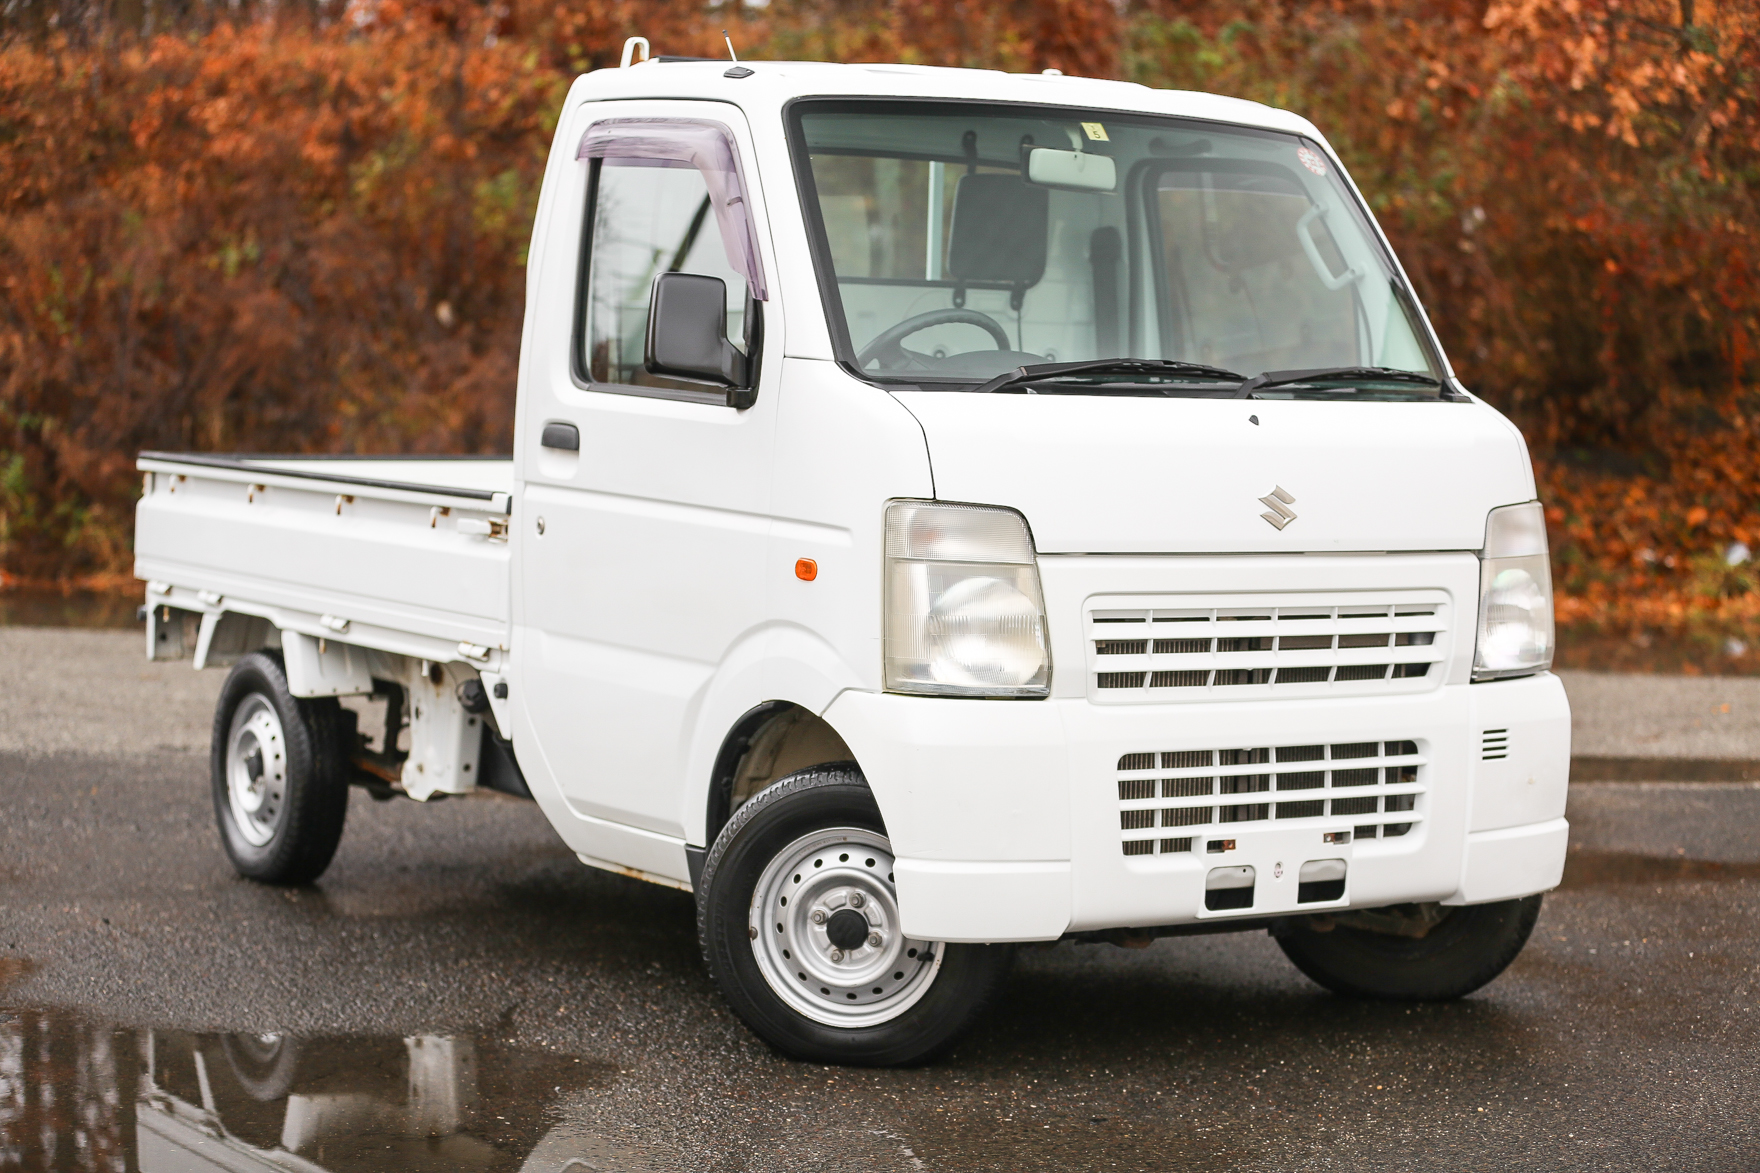 2011 Suzuki Carry Off Road - Available $9,950